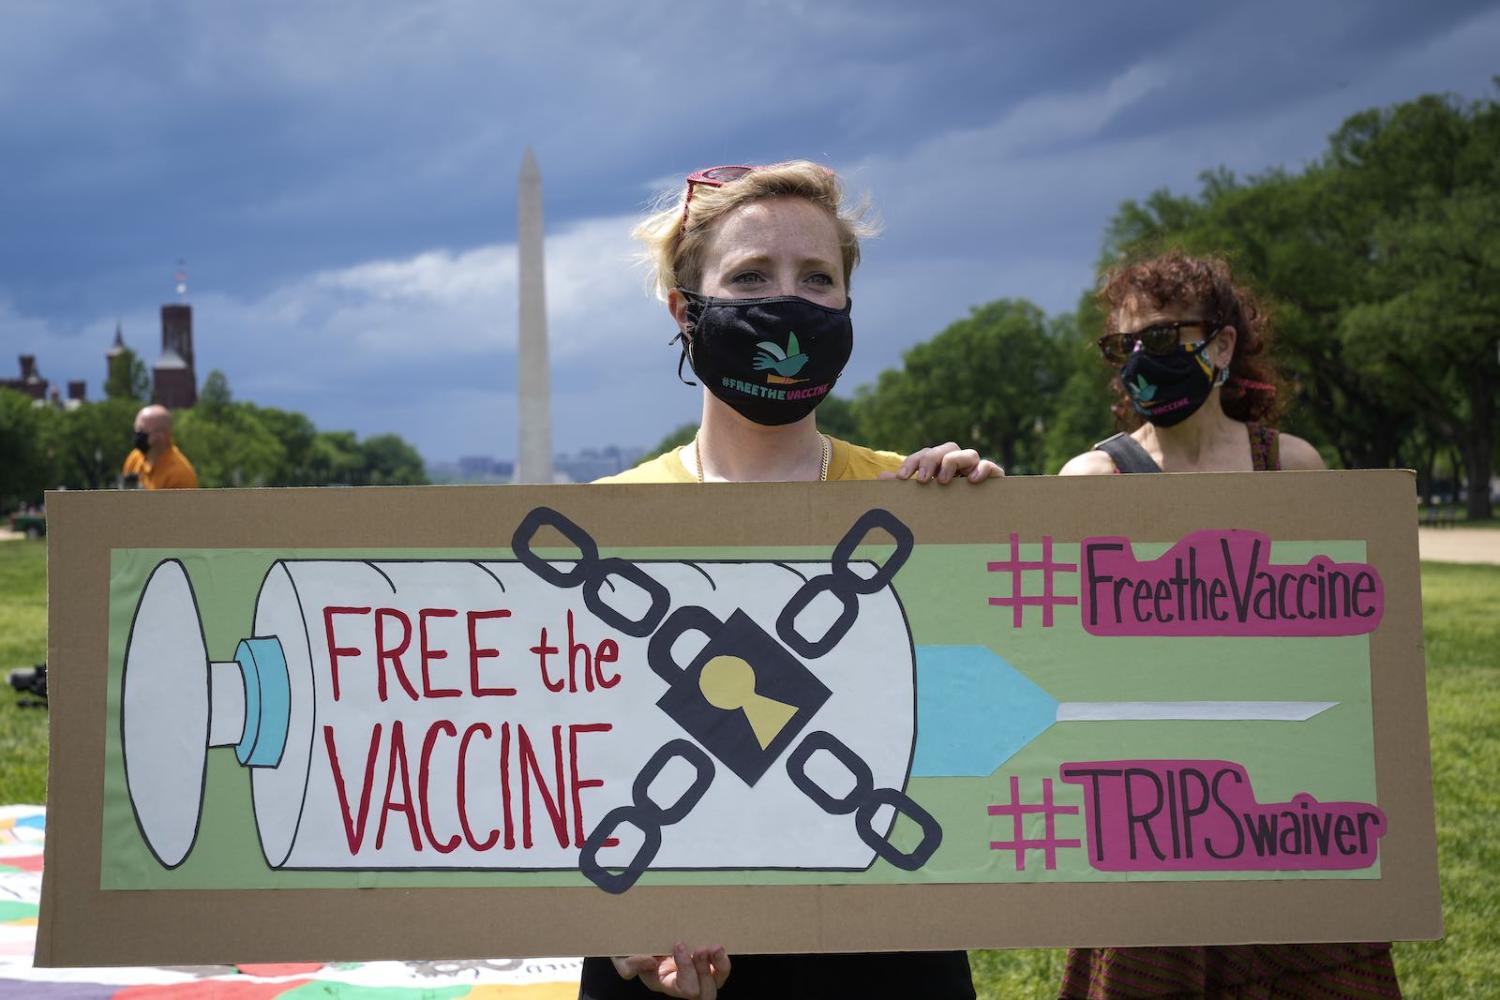  Demonstration in support of global access to Covid-19 vaccines, 5 May in Washington (Drew Angerer/Getty Images)